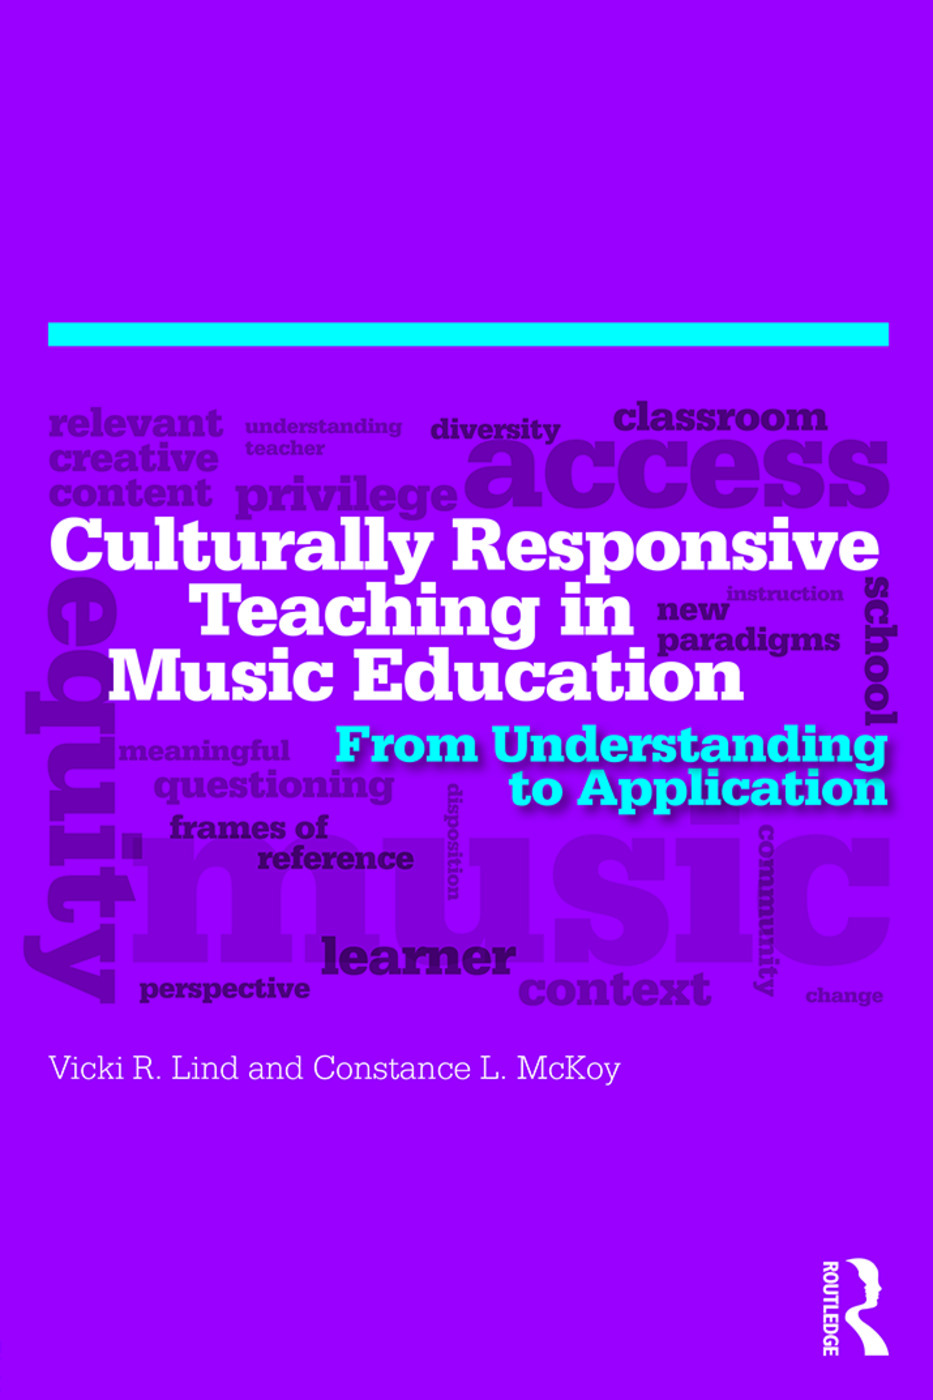 Culturally Responsive Teaching in Music Education From Understanding to Application<br>Vicki R. Lind and Constance McKoy 